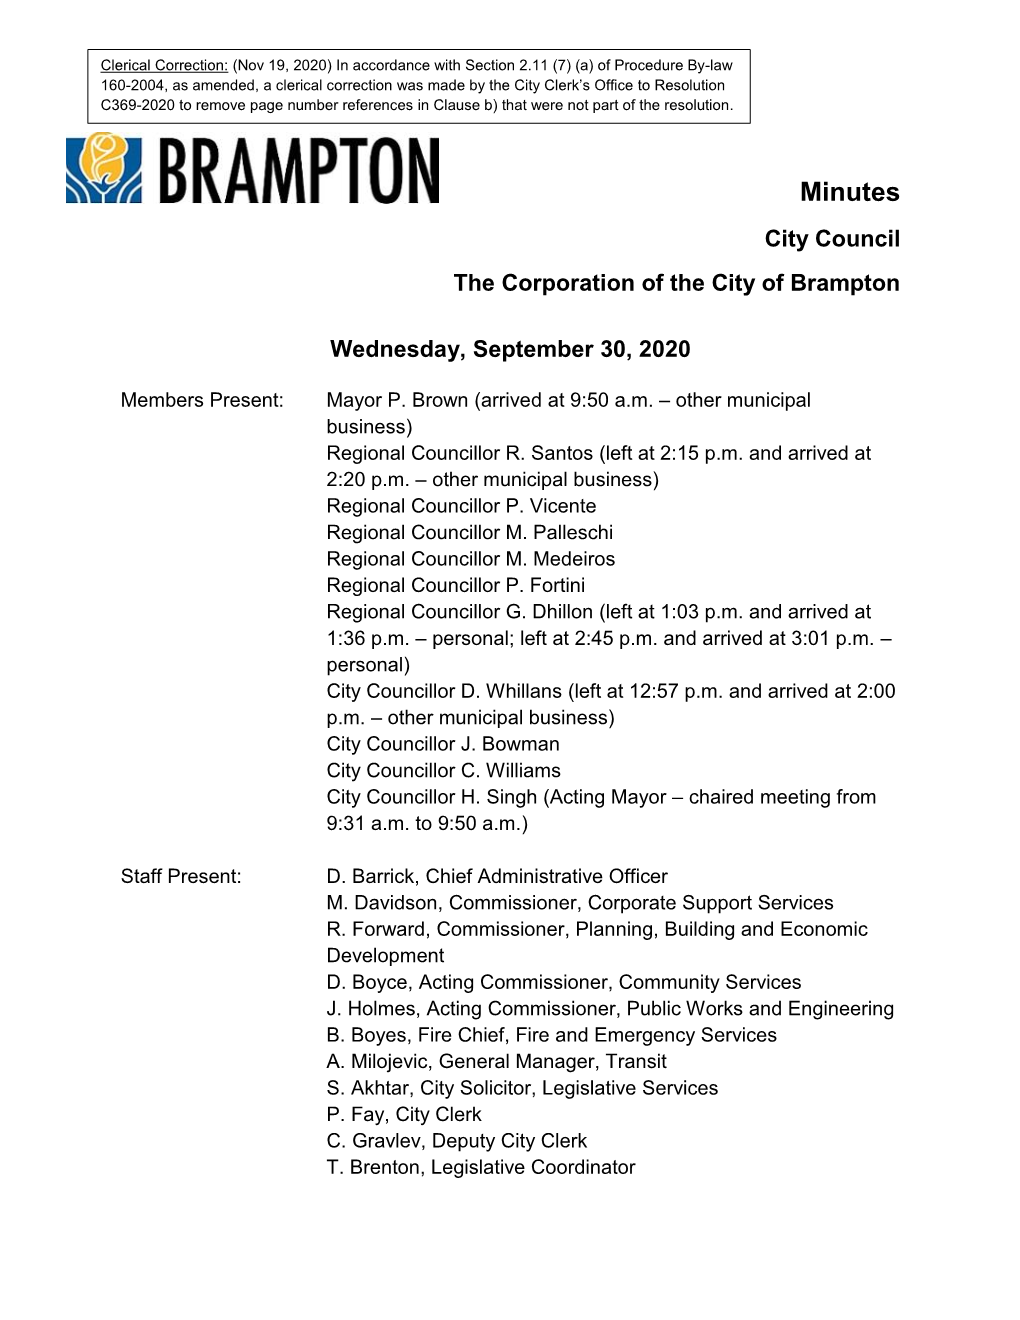 City Council Minutes for September 30, 2020